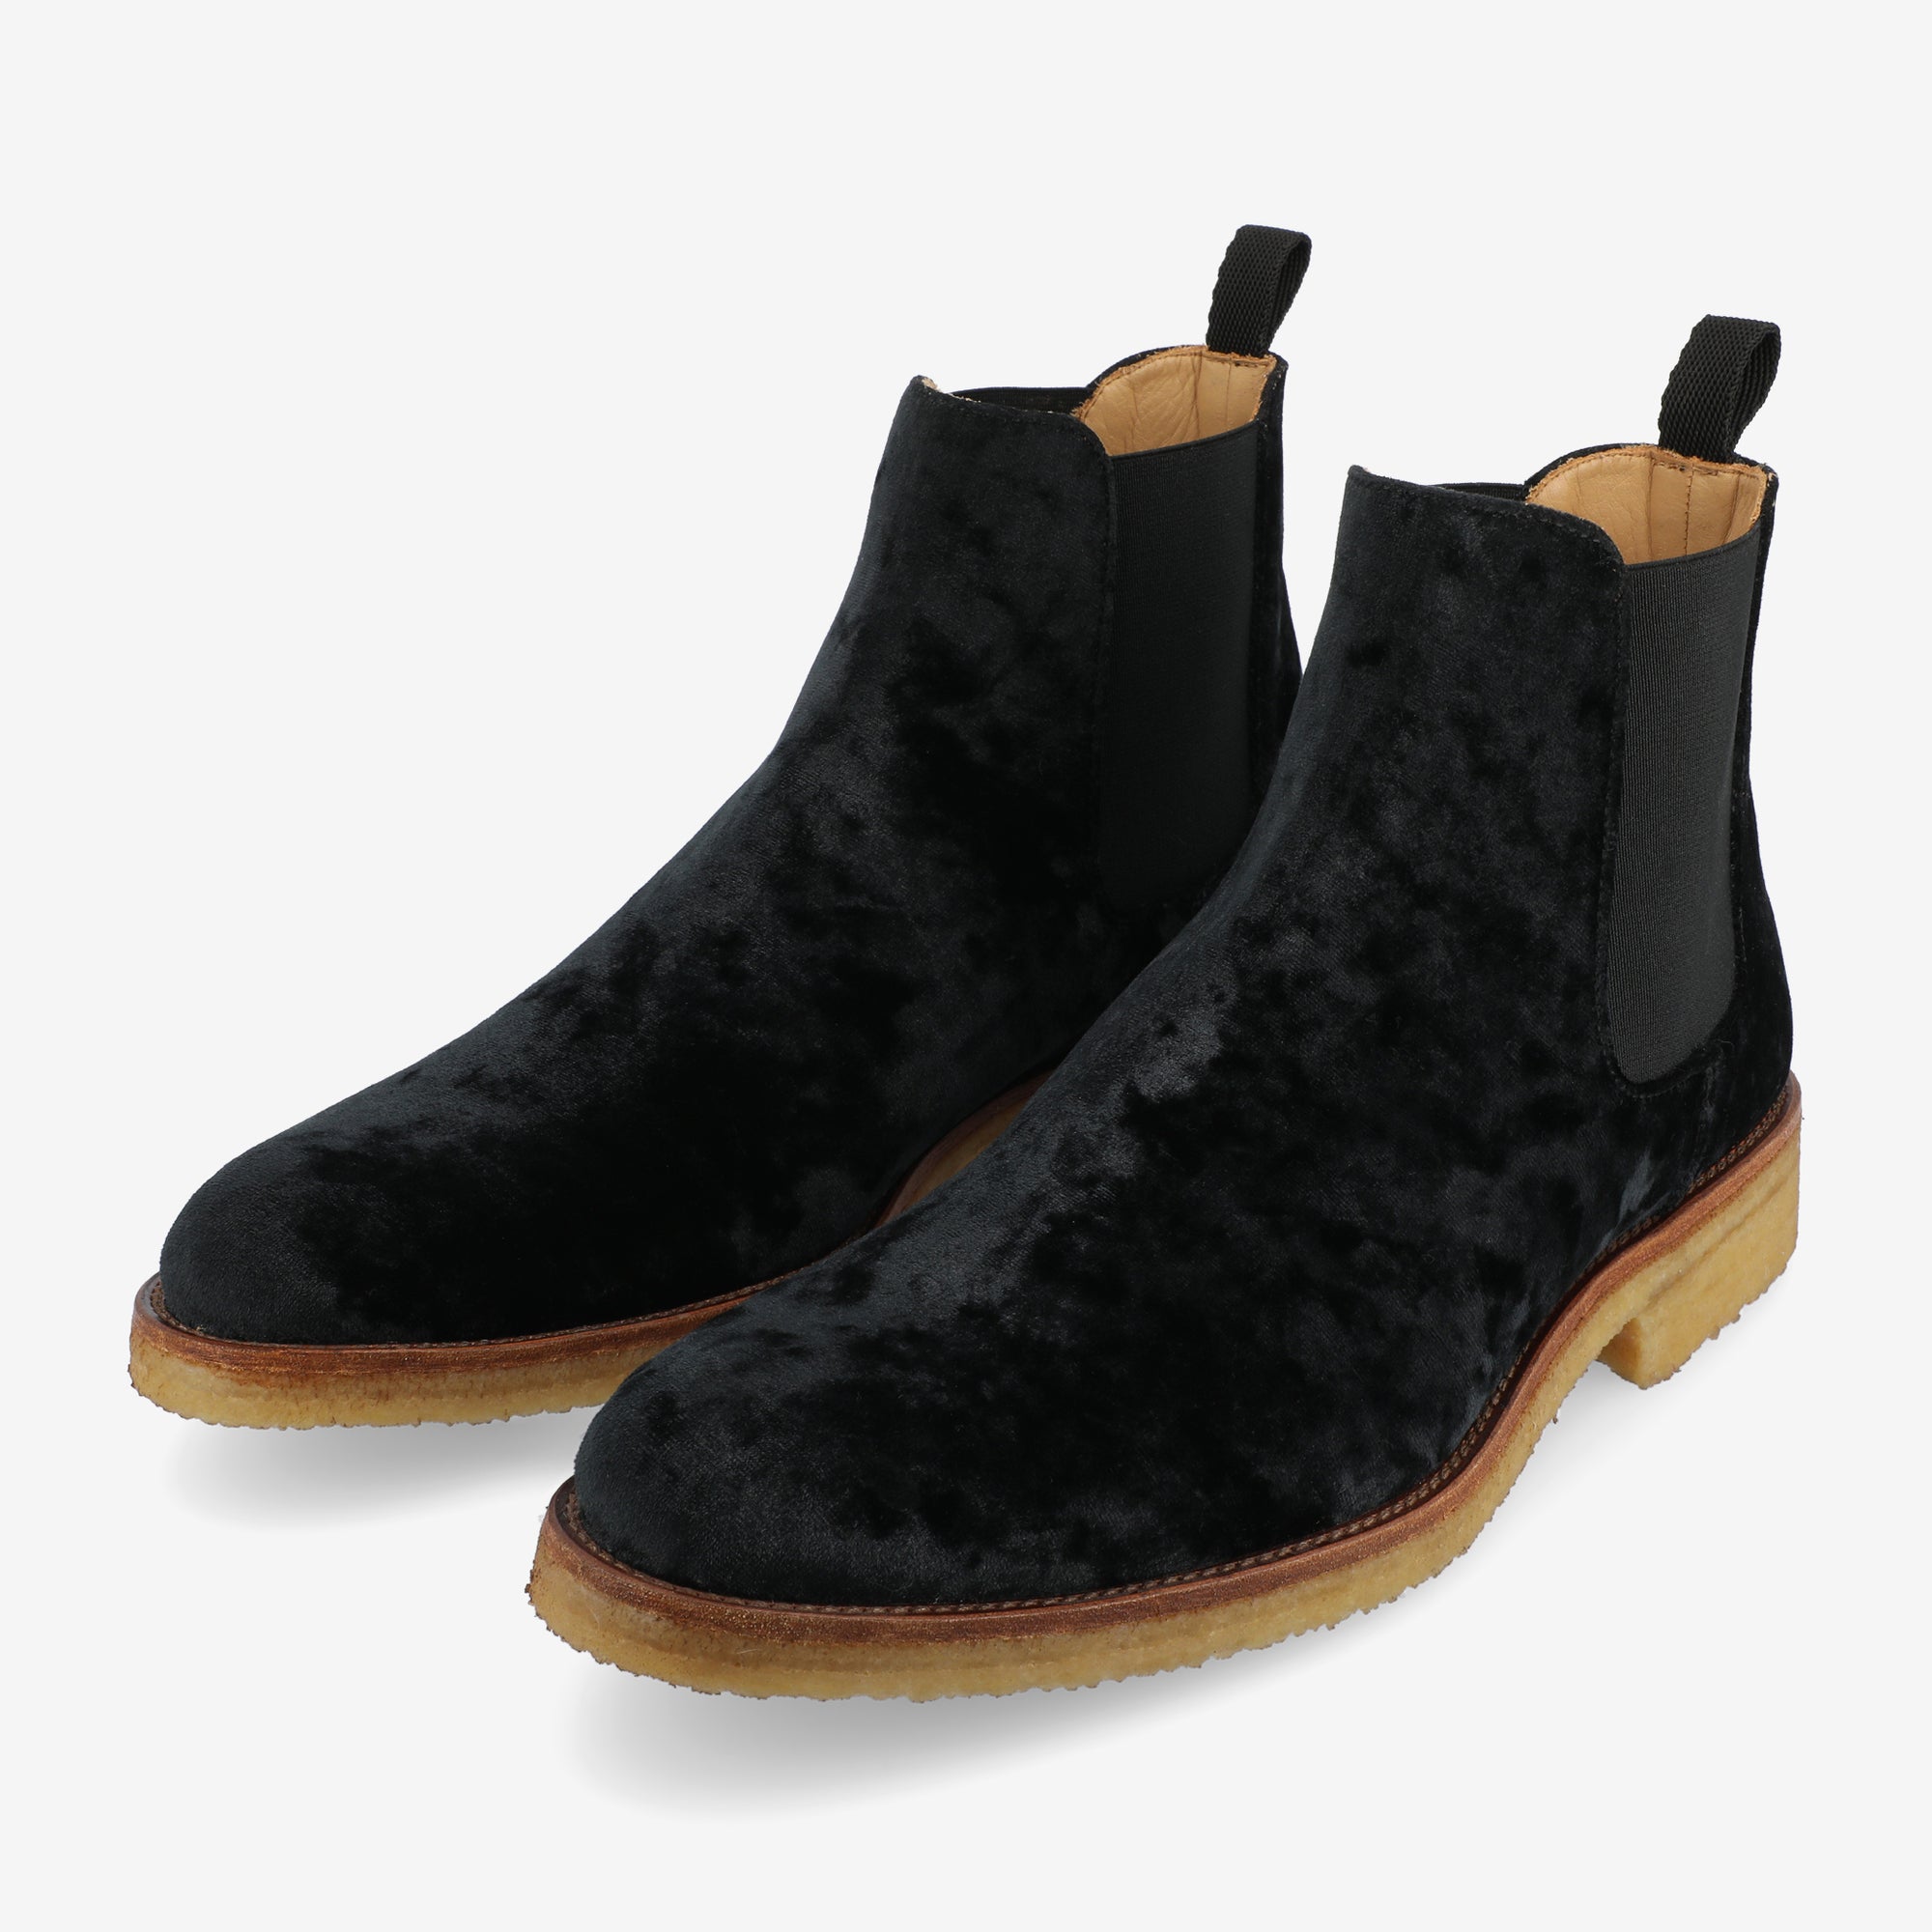 The Jude Boot in Black Velour